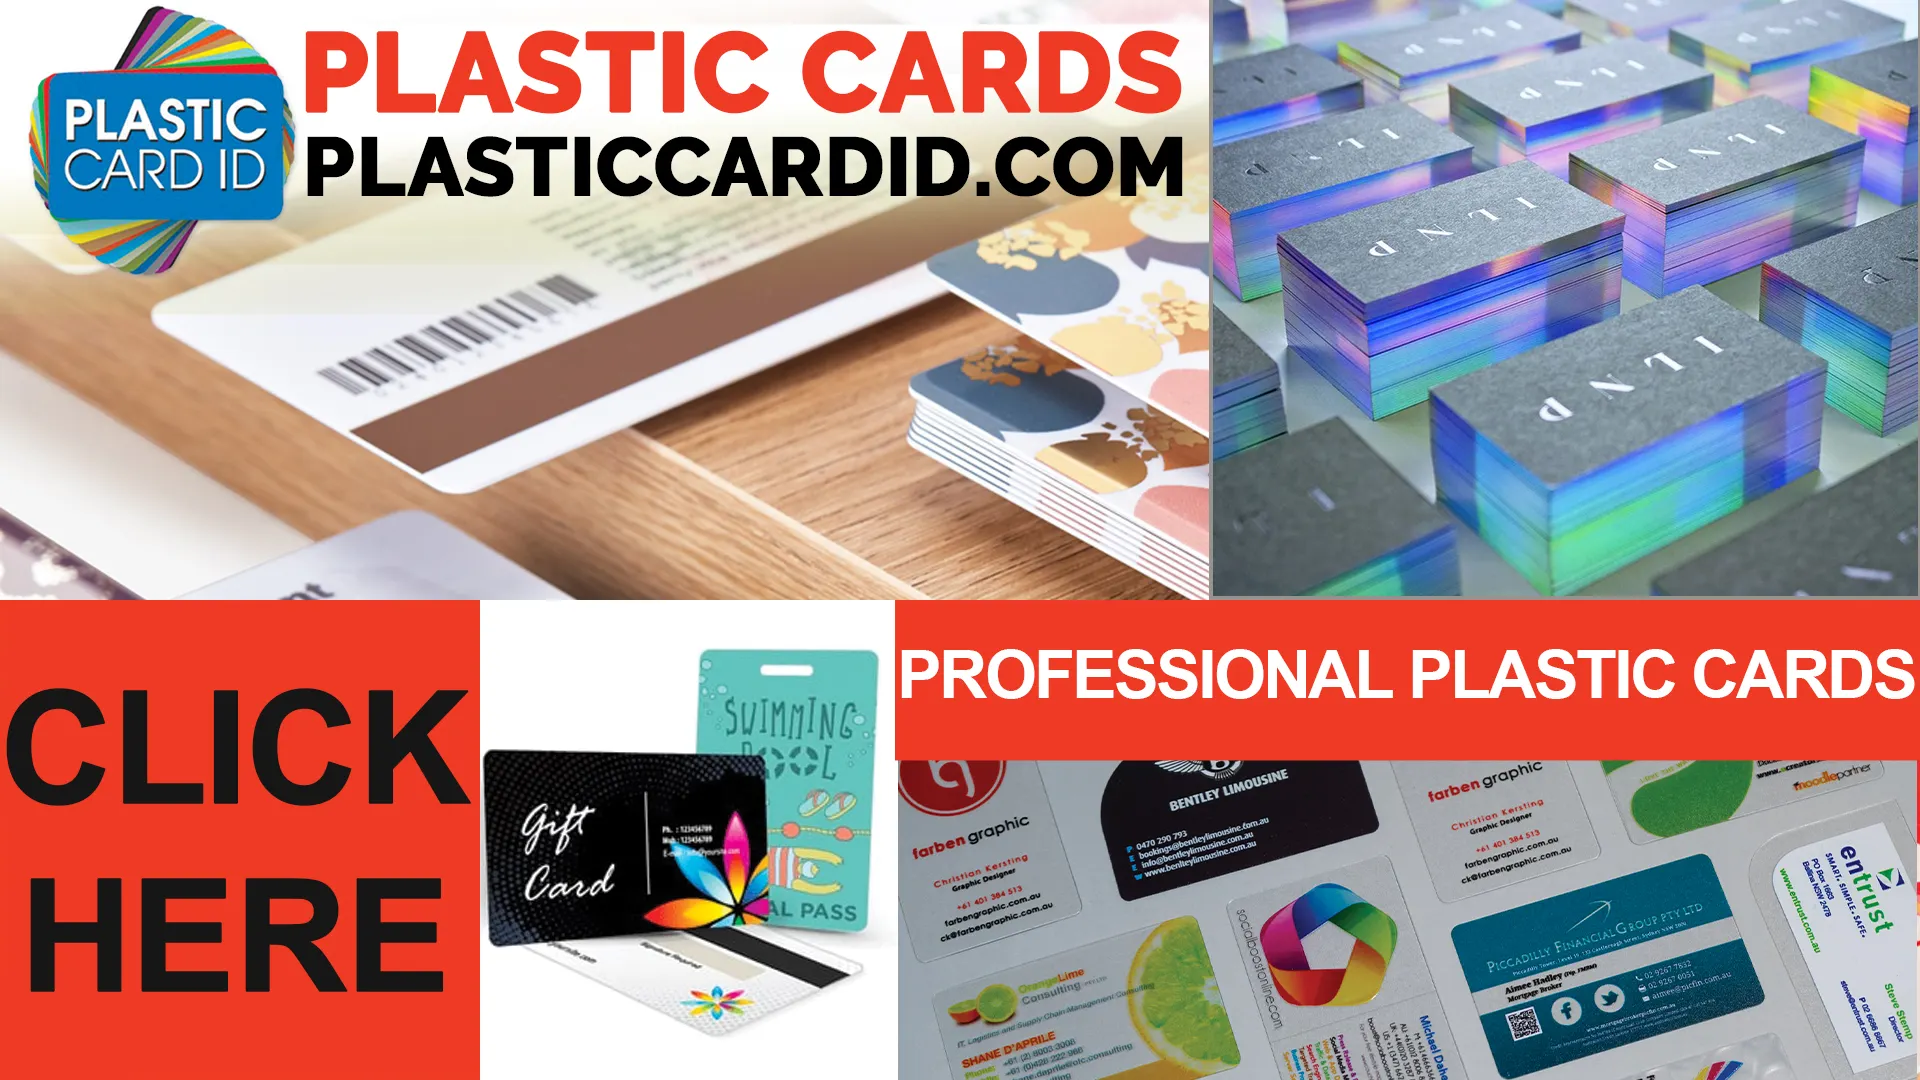 Discover Essential Insights into Specific Plastic Card Categories